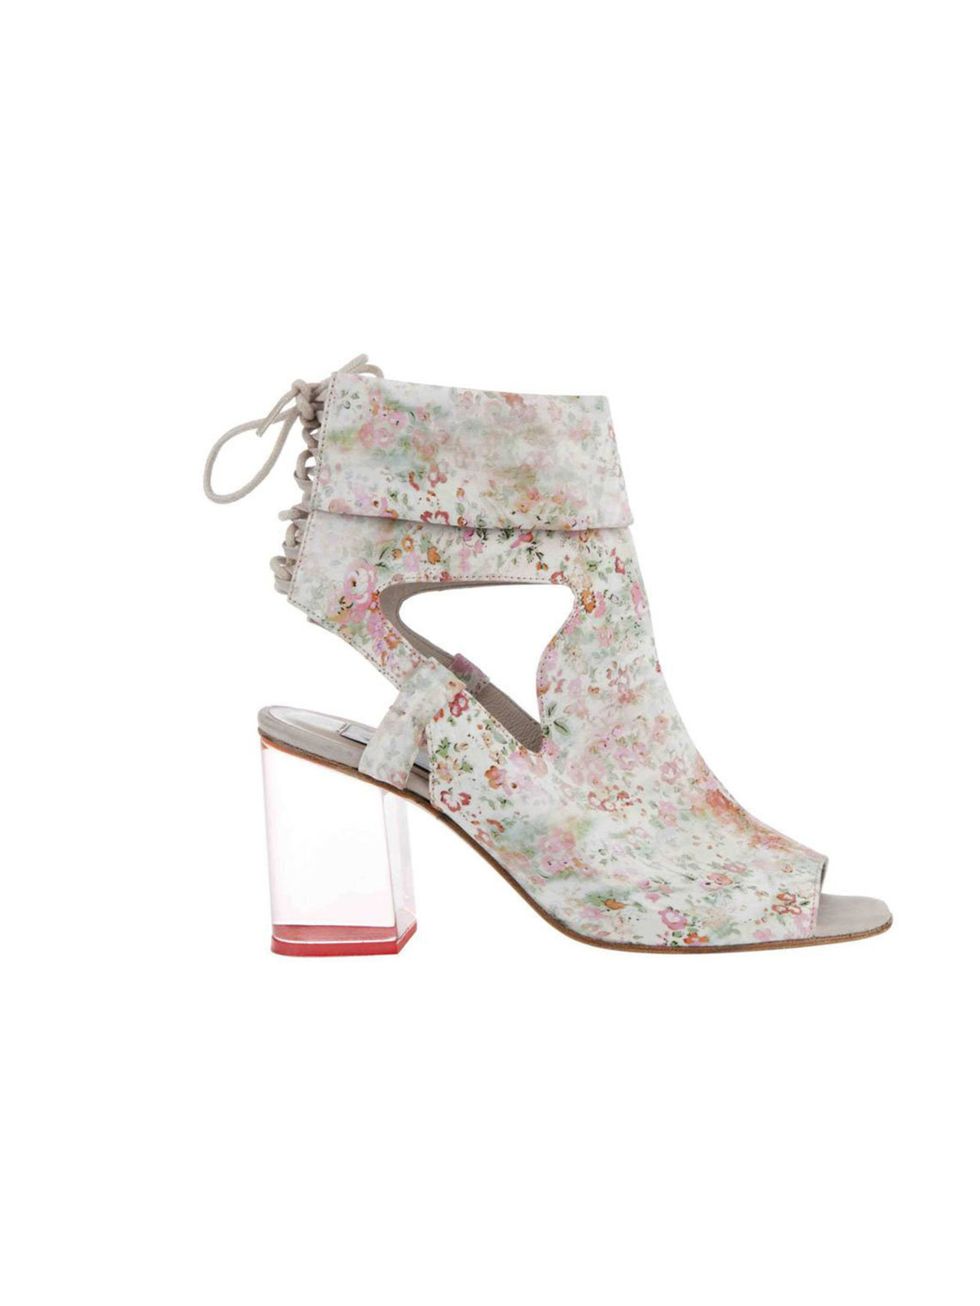 <p>b Store x Liberty perspex heel floral sandals, £245, at <a href="http://www.liberty.co.uk/search?productsPerPage=60&amp;keywords=b+store&amp;x=0&amp;y=0">Liberty</a></p>